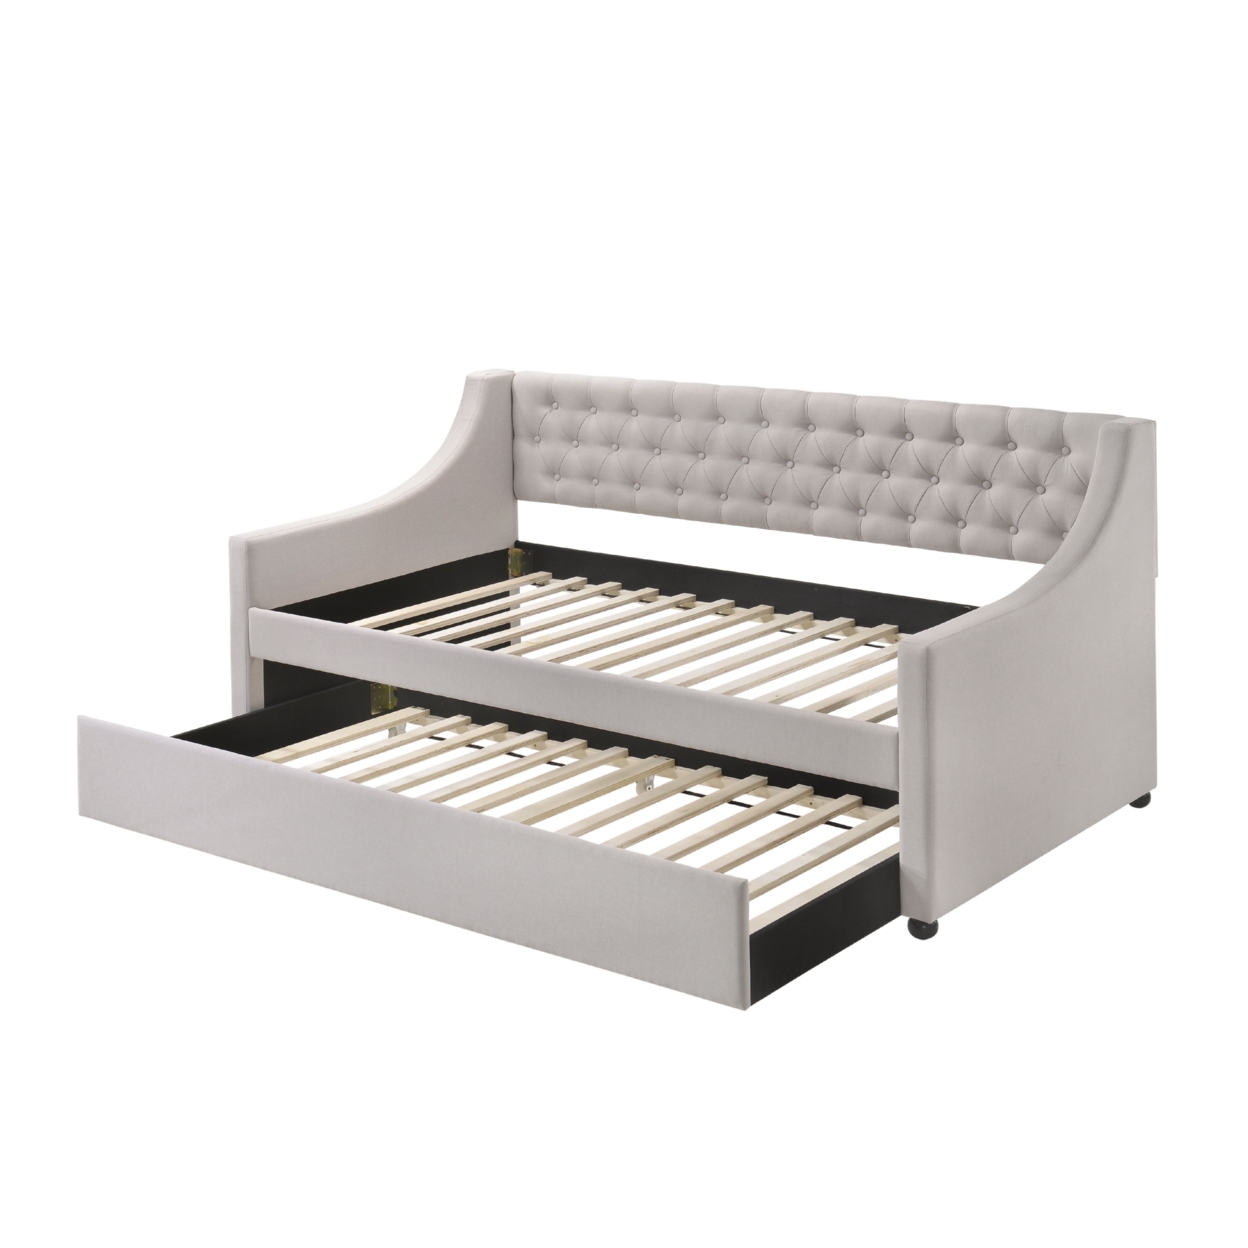 Fabric Twin Size Daybed With Button Tufted Back And Sloped Arms,Light Gray- Saltoro Sherpi